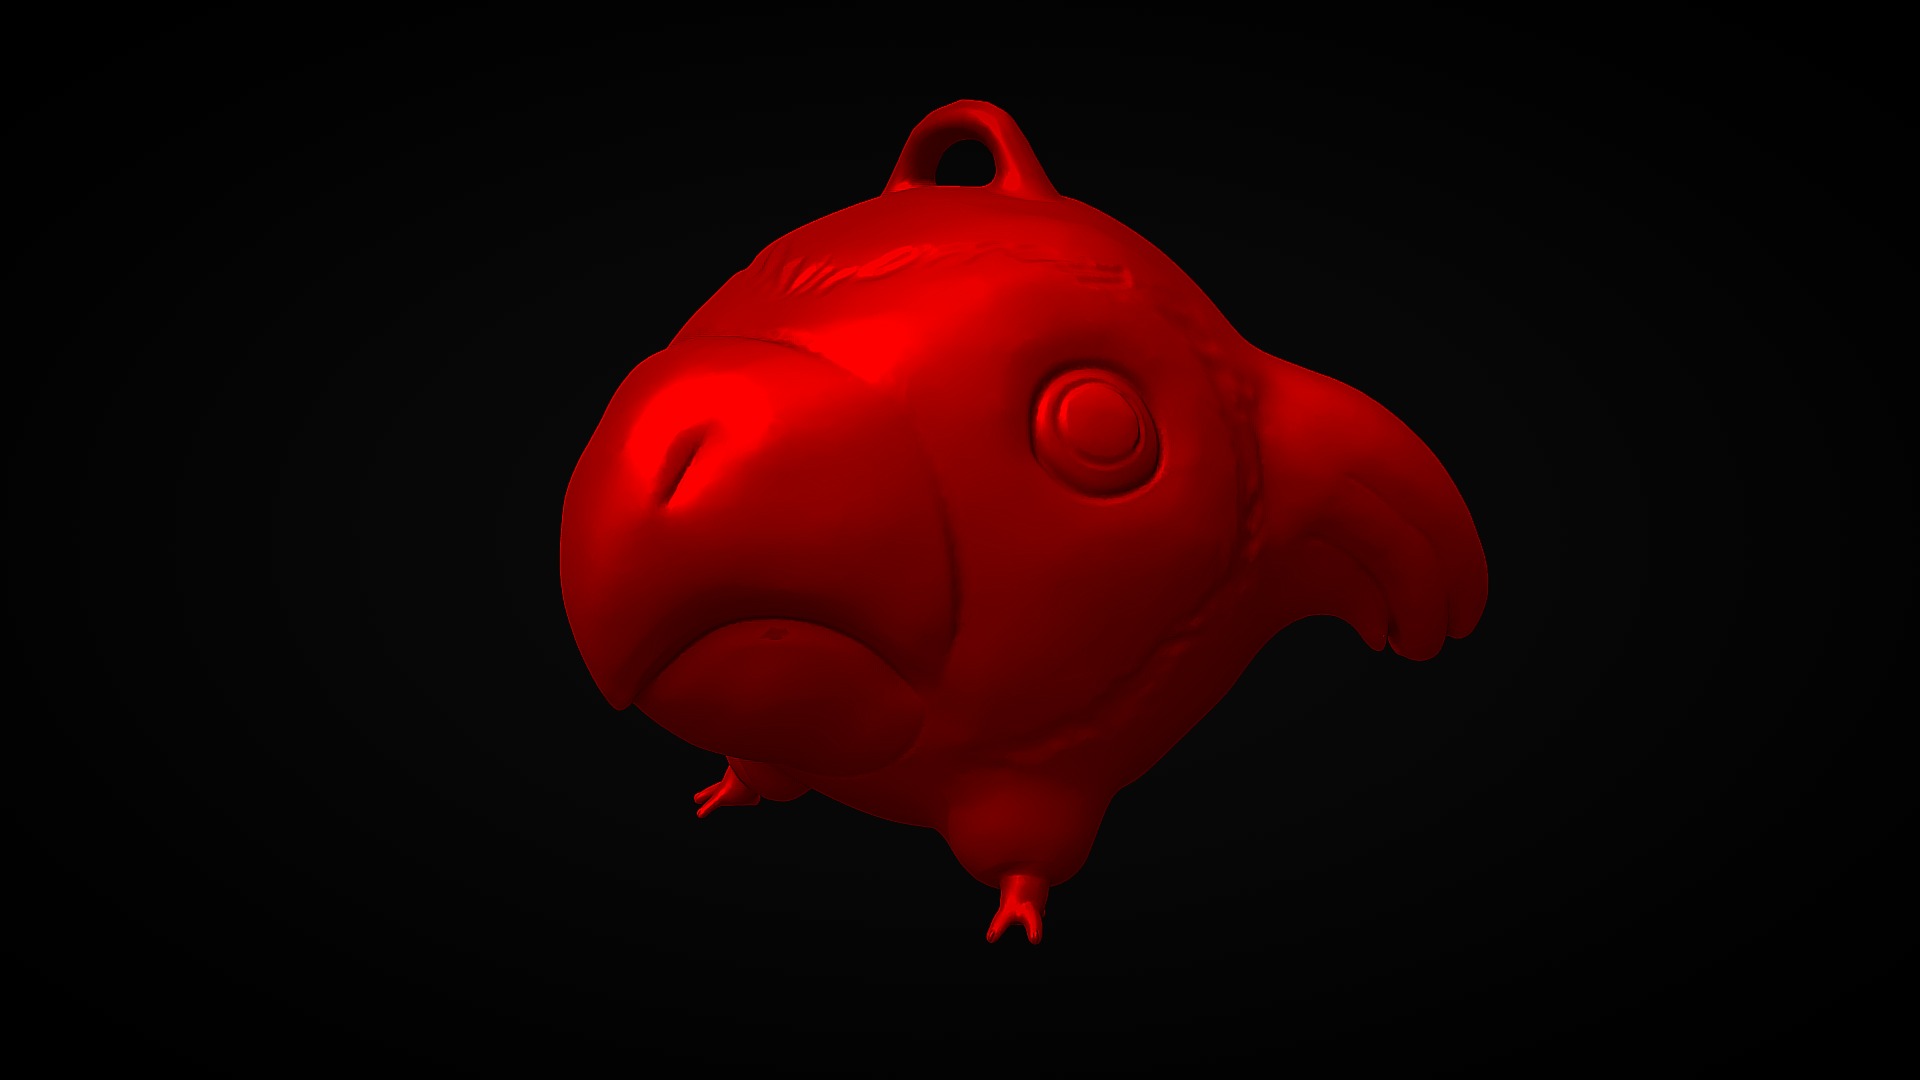 3D model Parrot Pendant Printable - This is a 3D model of the Parrot Pendant Printable. The 3D model is about a red plastic toy.